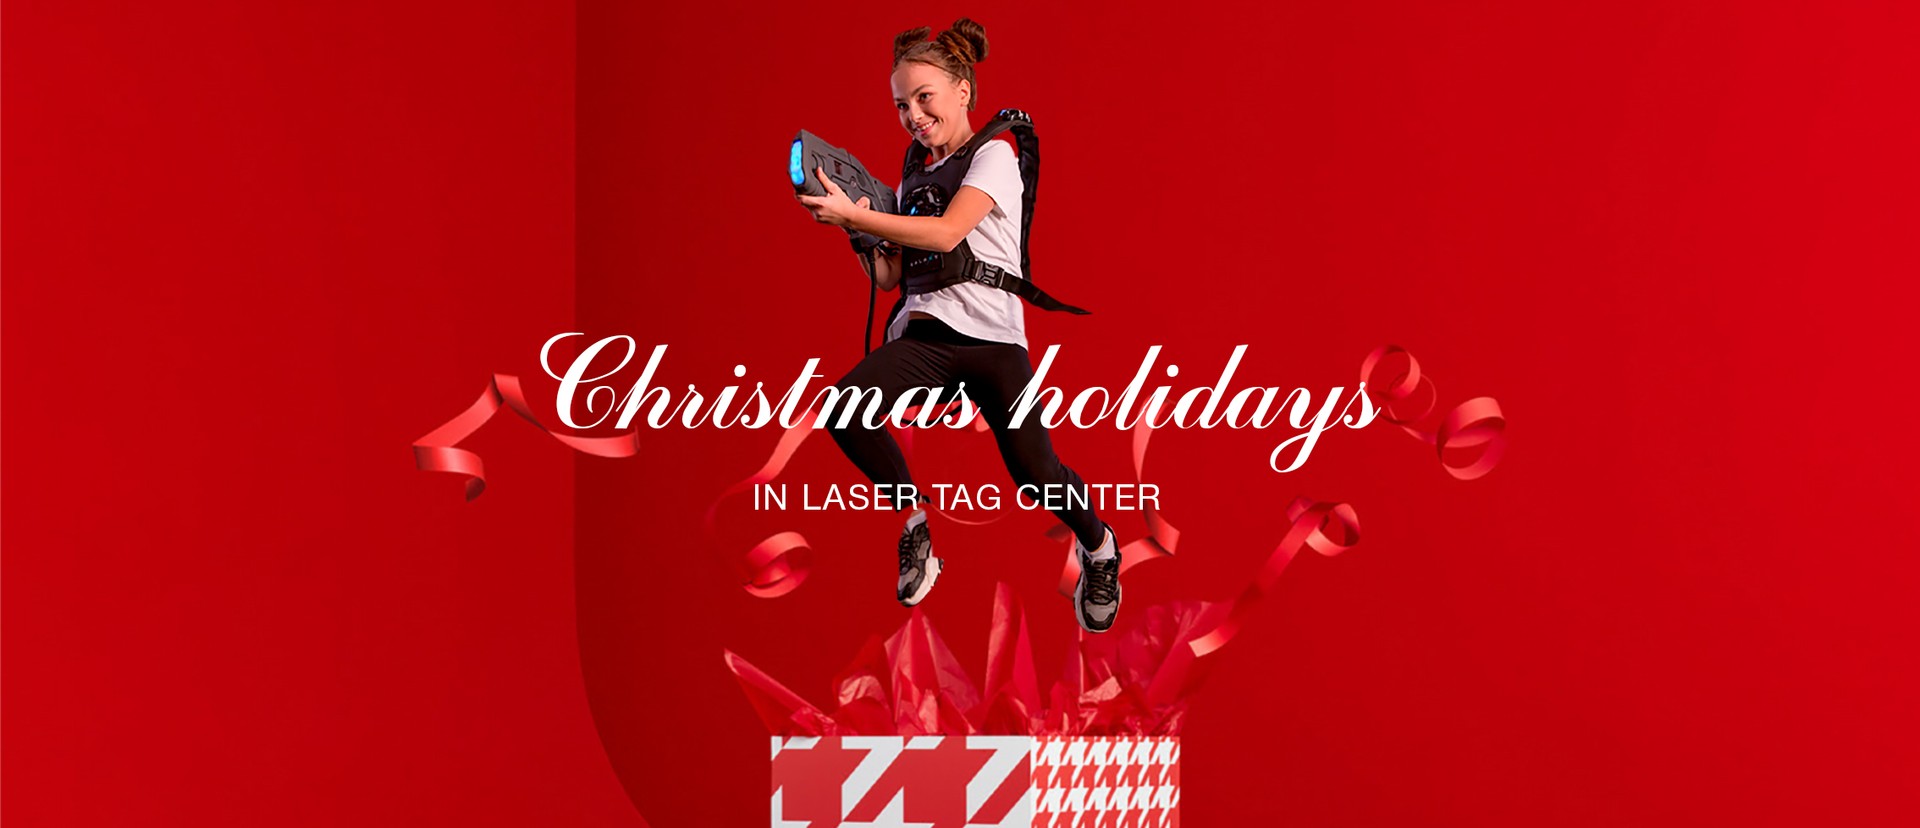 How to organize a winter holiday celebration at the laser tag center?